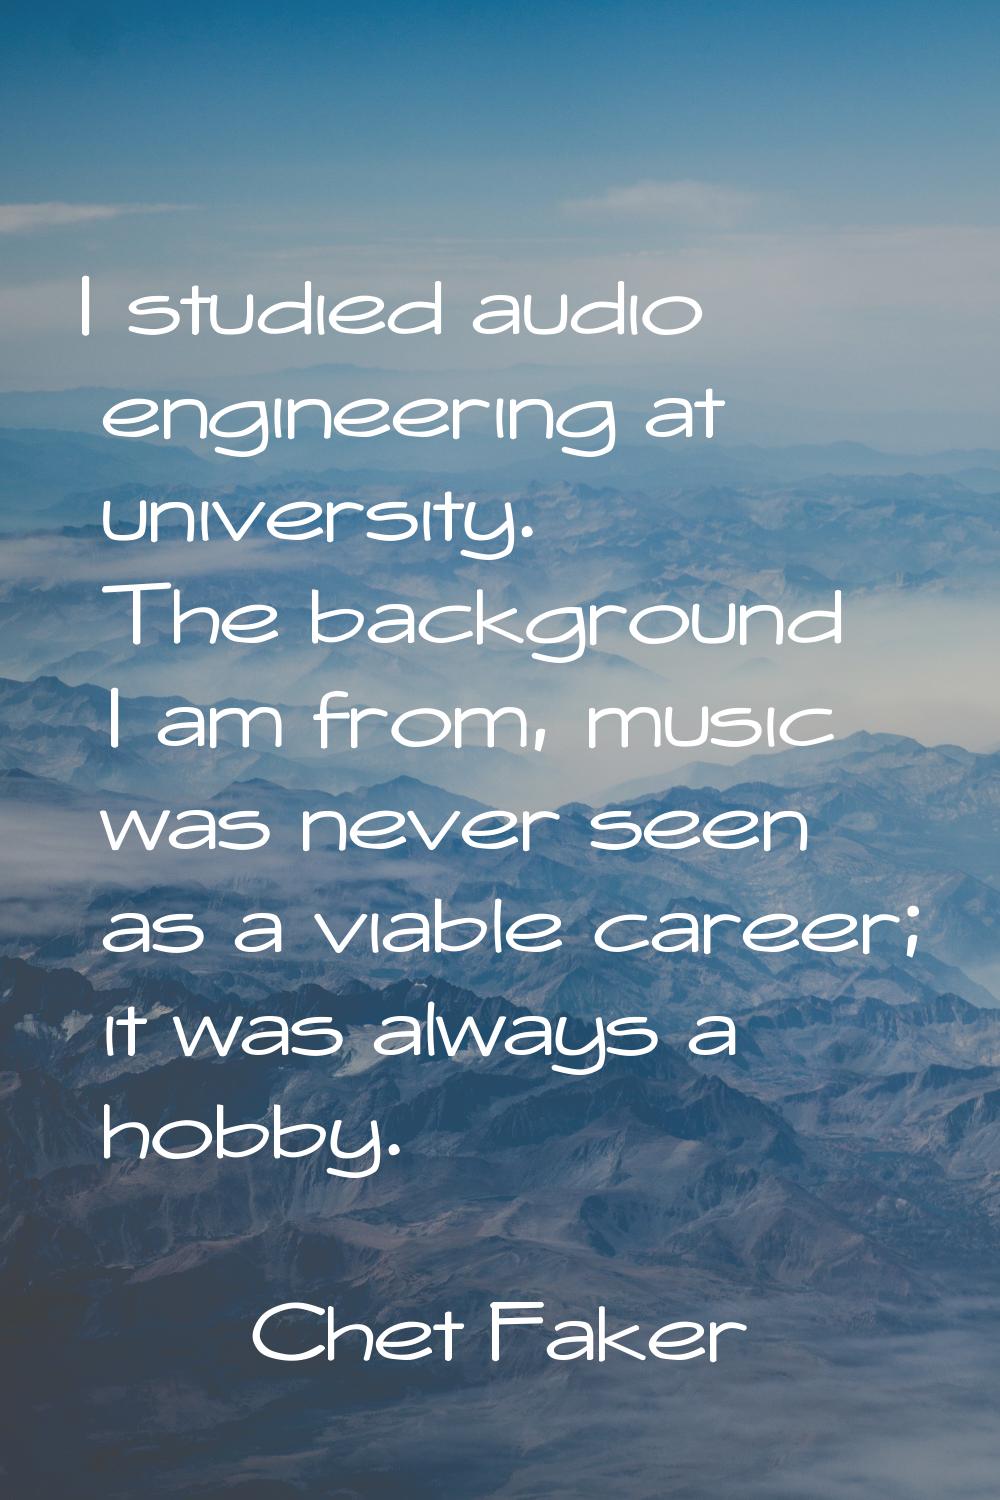 I studied audio engineering at university. The background I am from, music was never seen as a viab